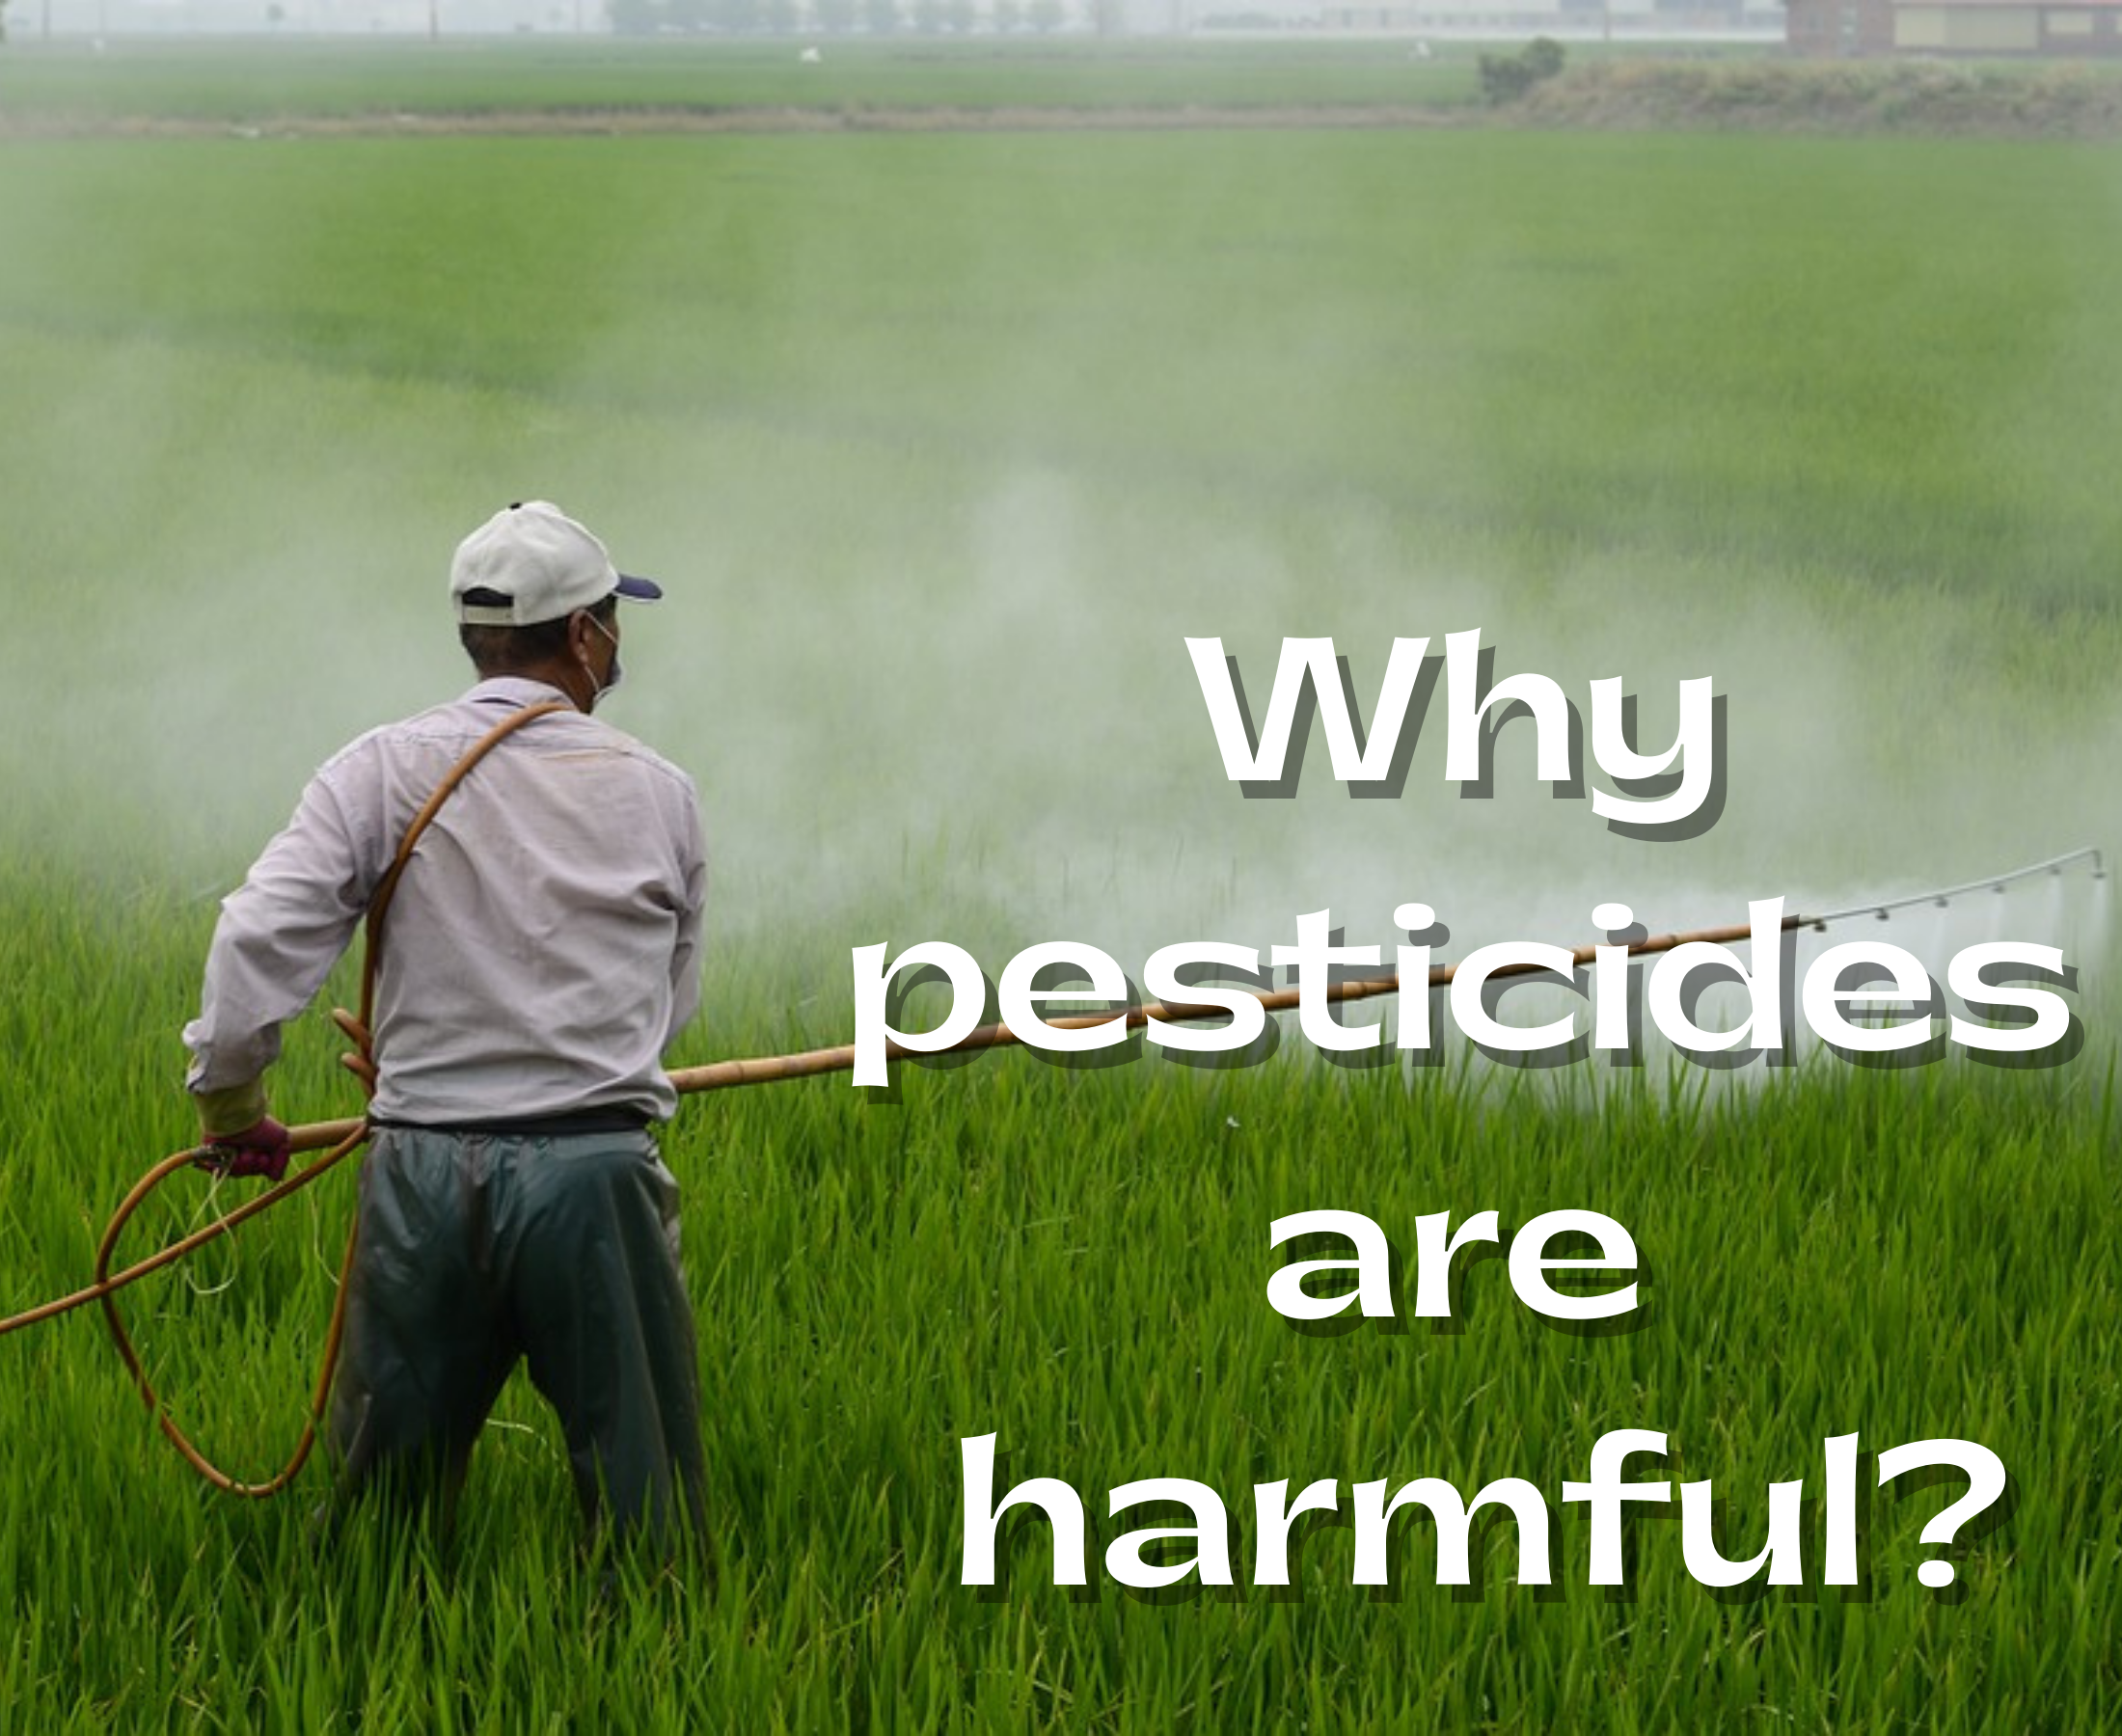 Pesticides are harmful, why? Solution for this